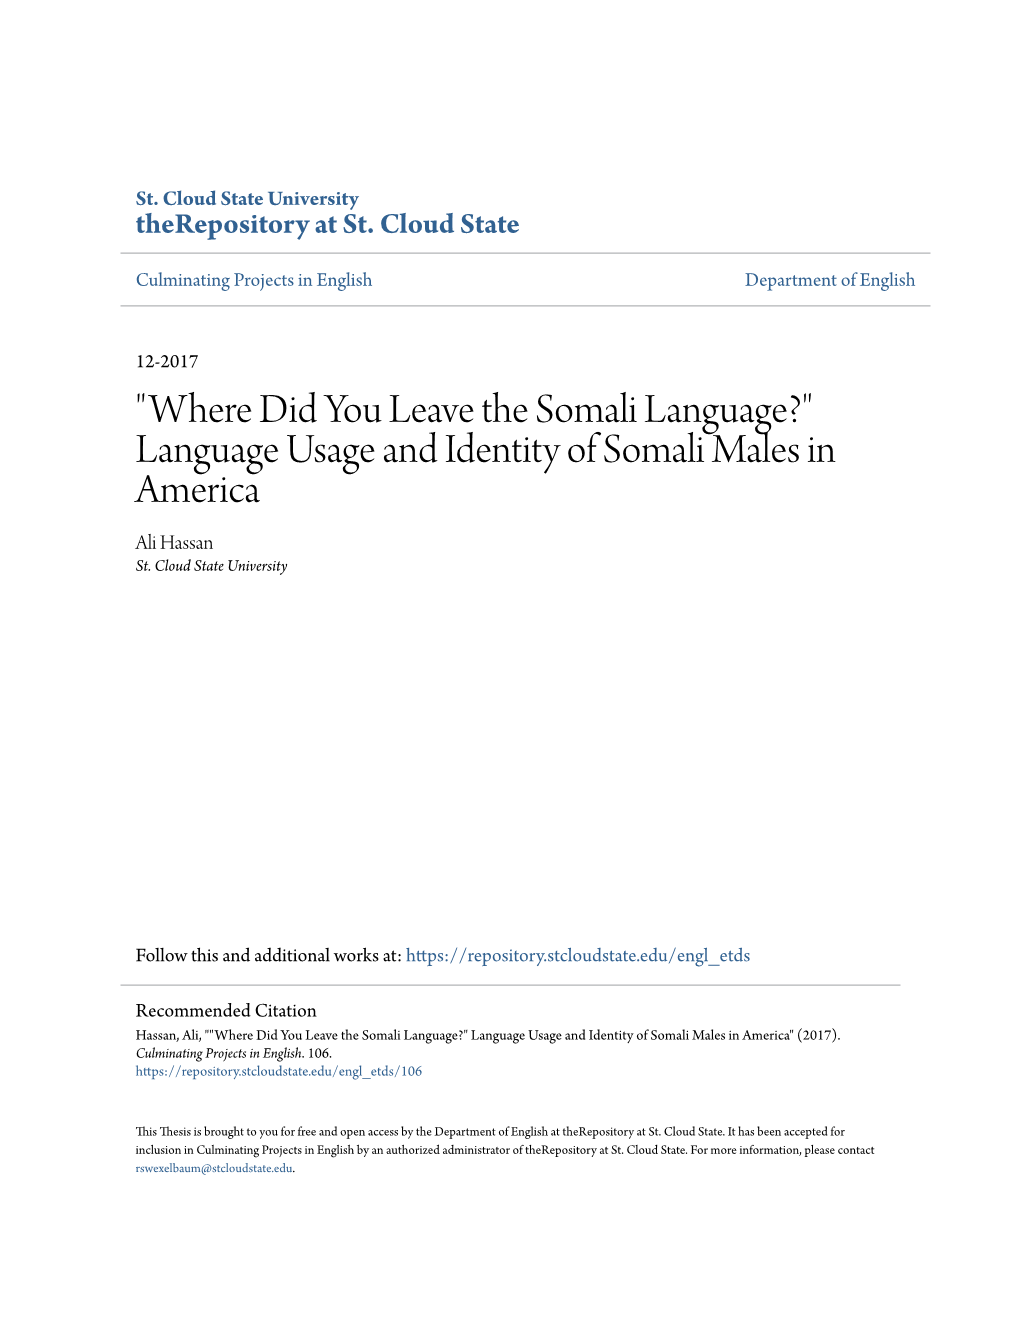 Language Usage and Identity of Somali Males in America Ali Hassan St